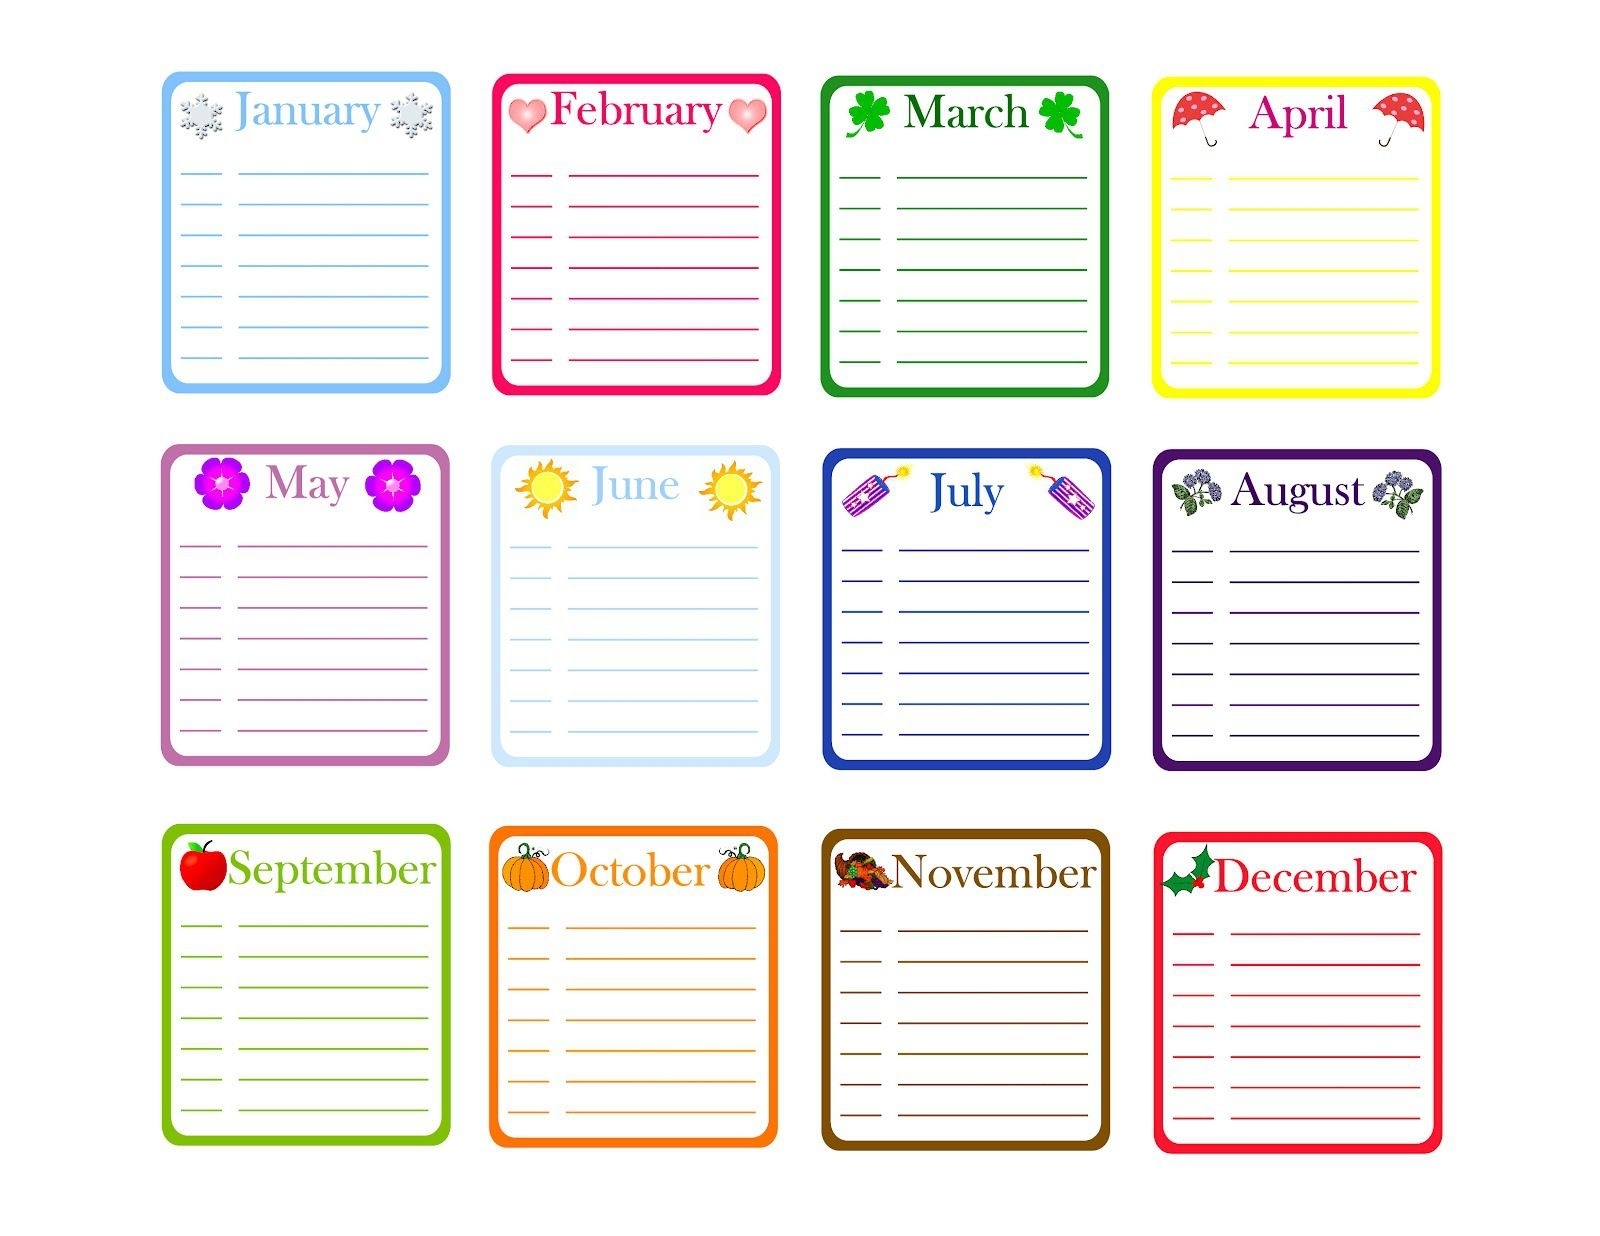 Yearly Birthday Calendar Template. Free Classroom Printables intended for 12 Month Birthday Calendar Template